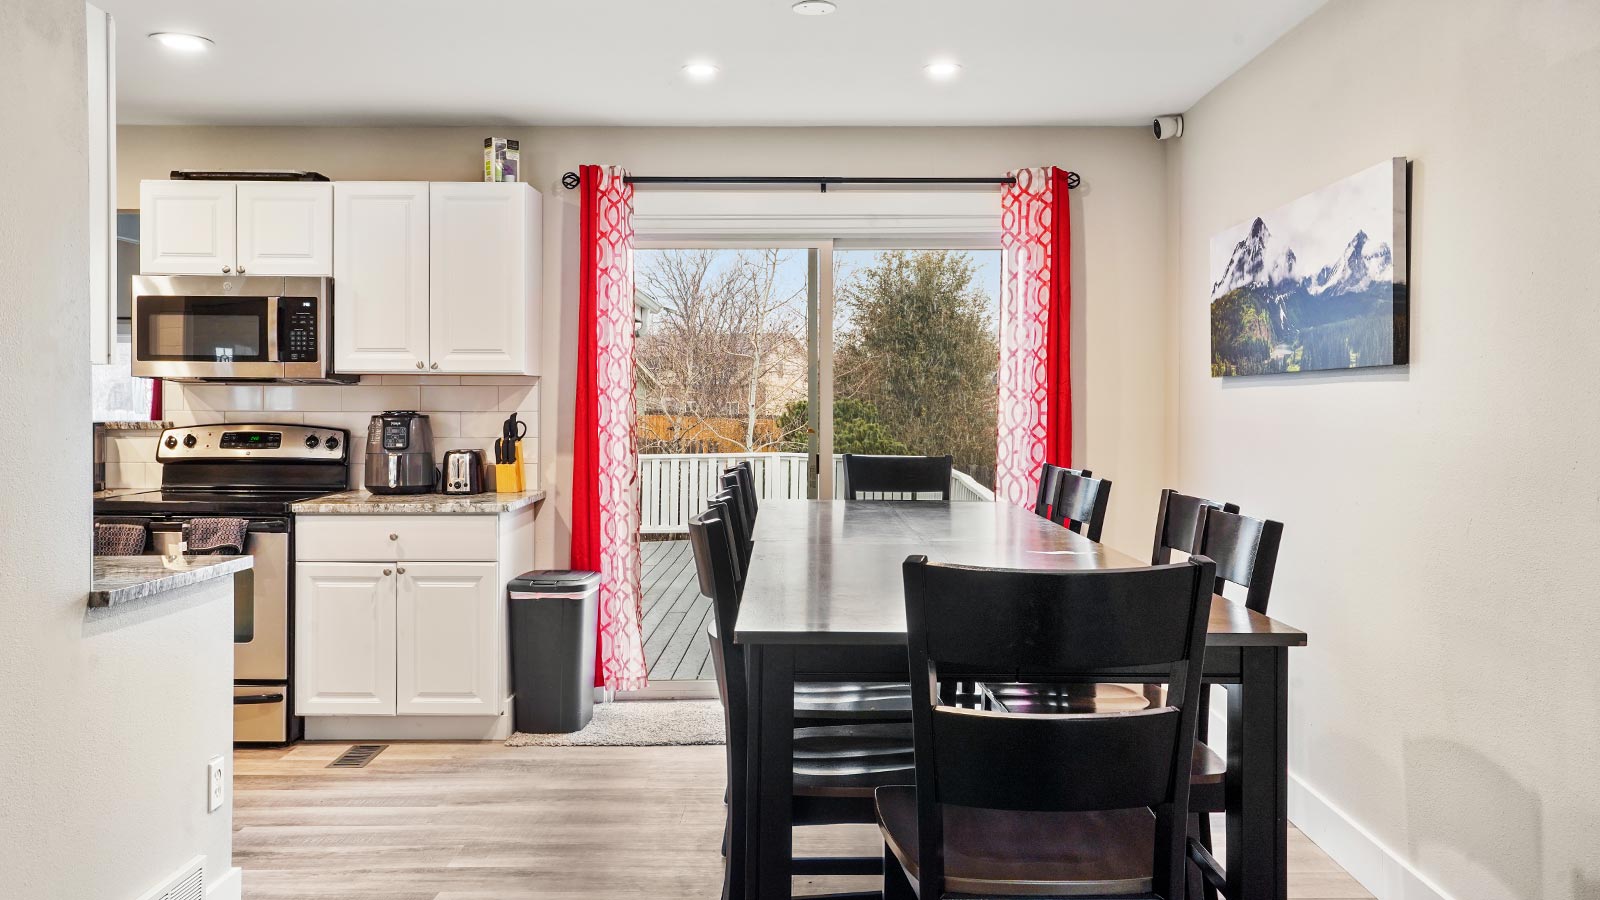 A bright kitchen with white cabinets and a dining area with a view of the backyard through sliding doors.